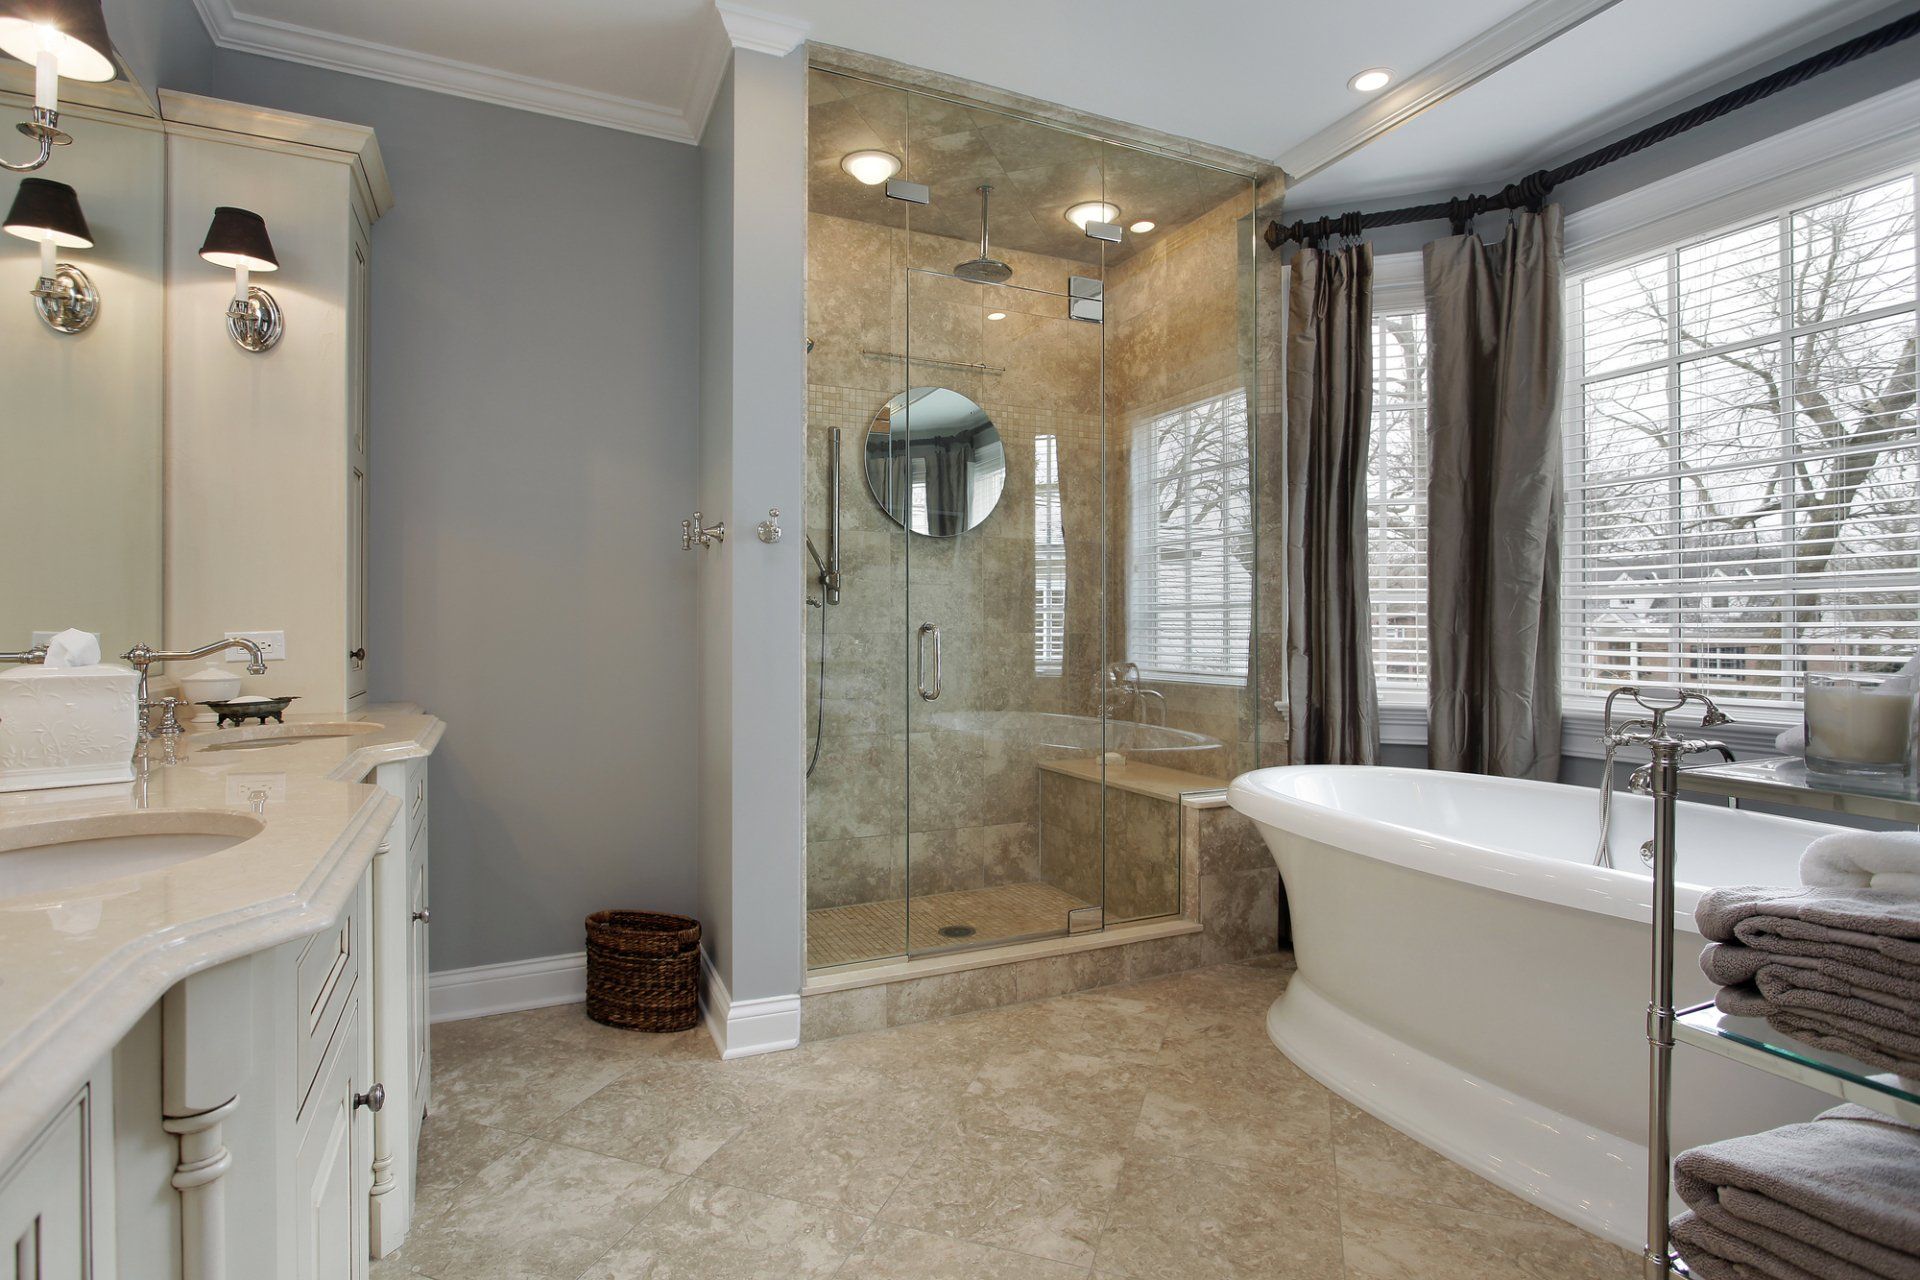 Bathroom Remodeling in Chicago, IL | All Quality, Inc.